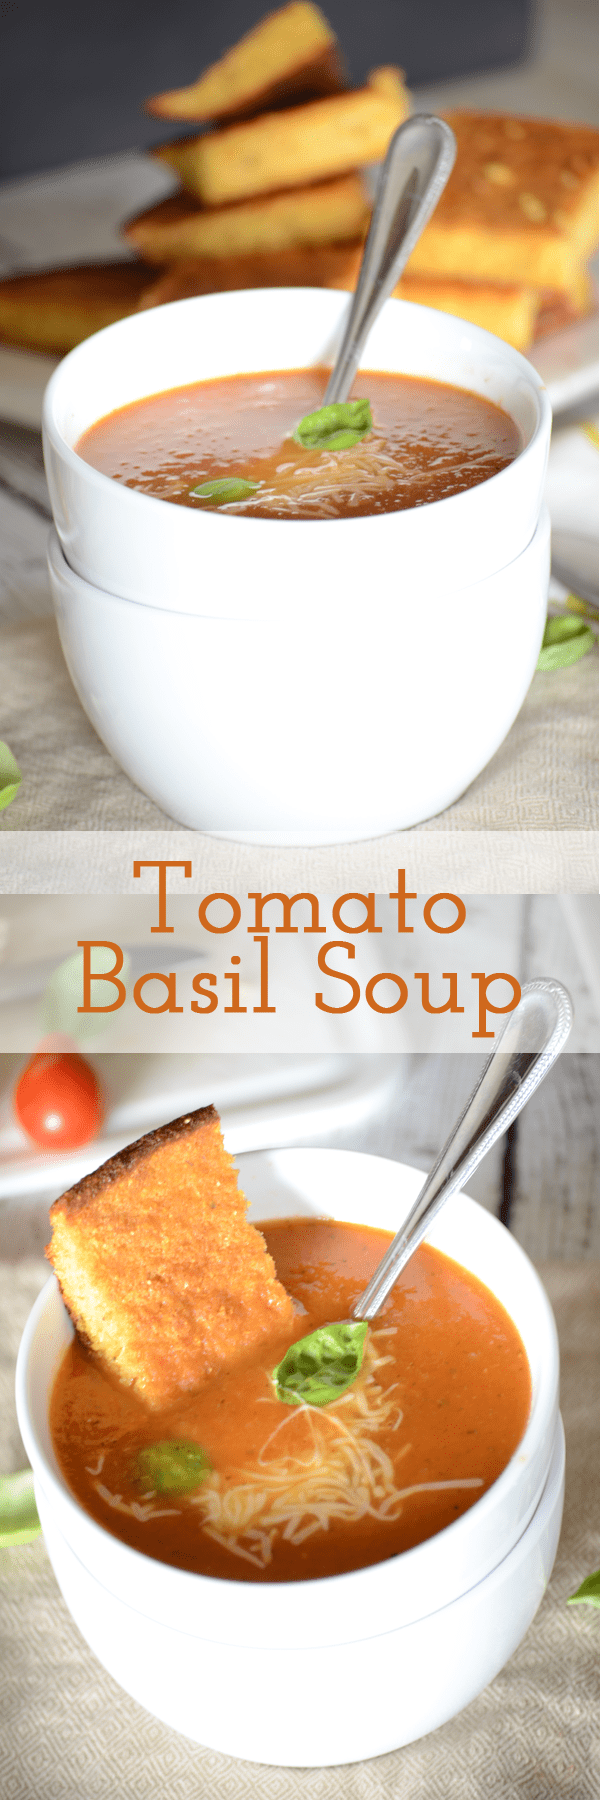 You have to try this easy tomato basil soup recipe! It is so easy to toss together and perfect for a weeknight meal! Can be done in under 30 minutes